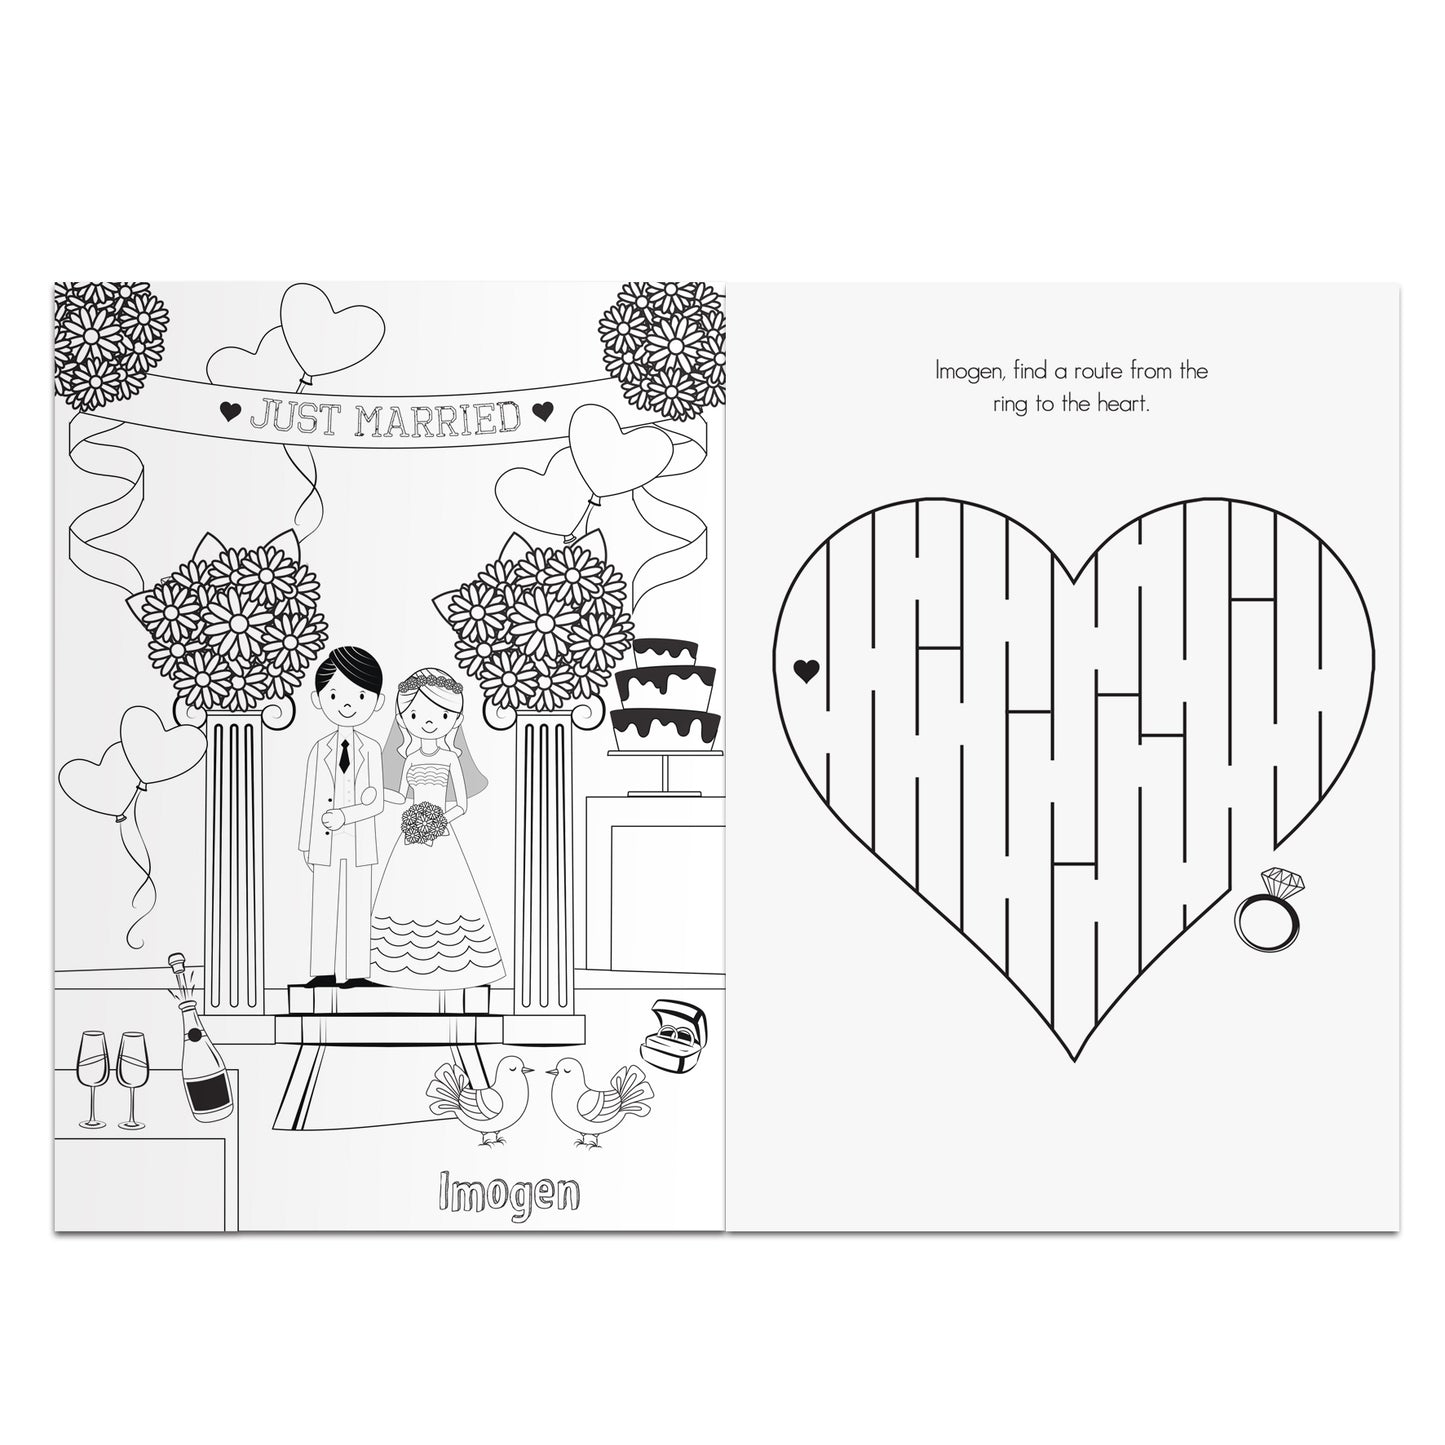 Wedding activity book for girls and boys, personalised - Lilybet loves